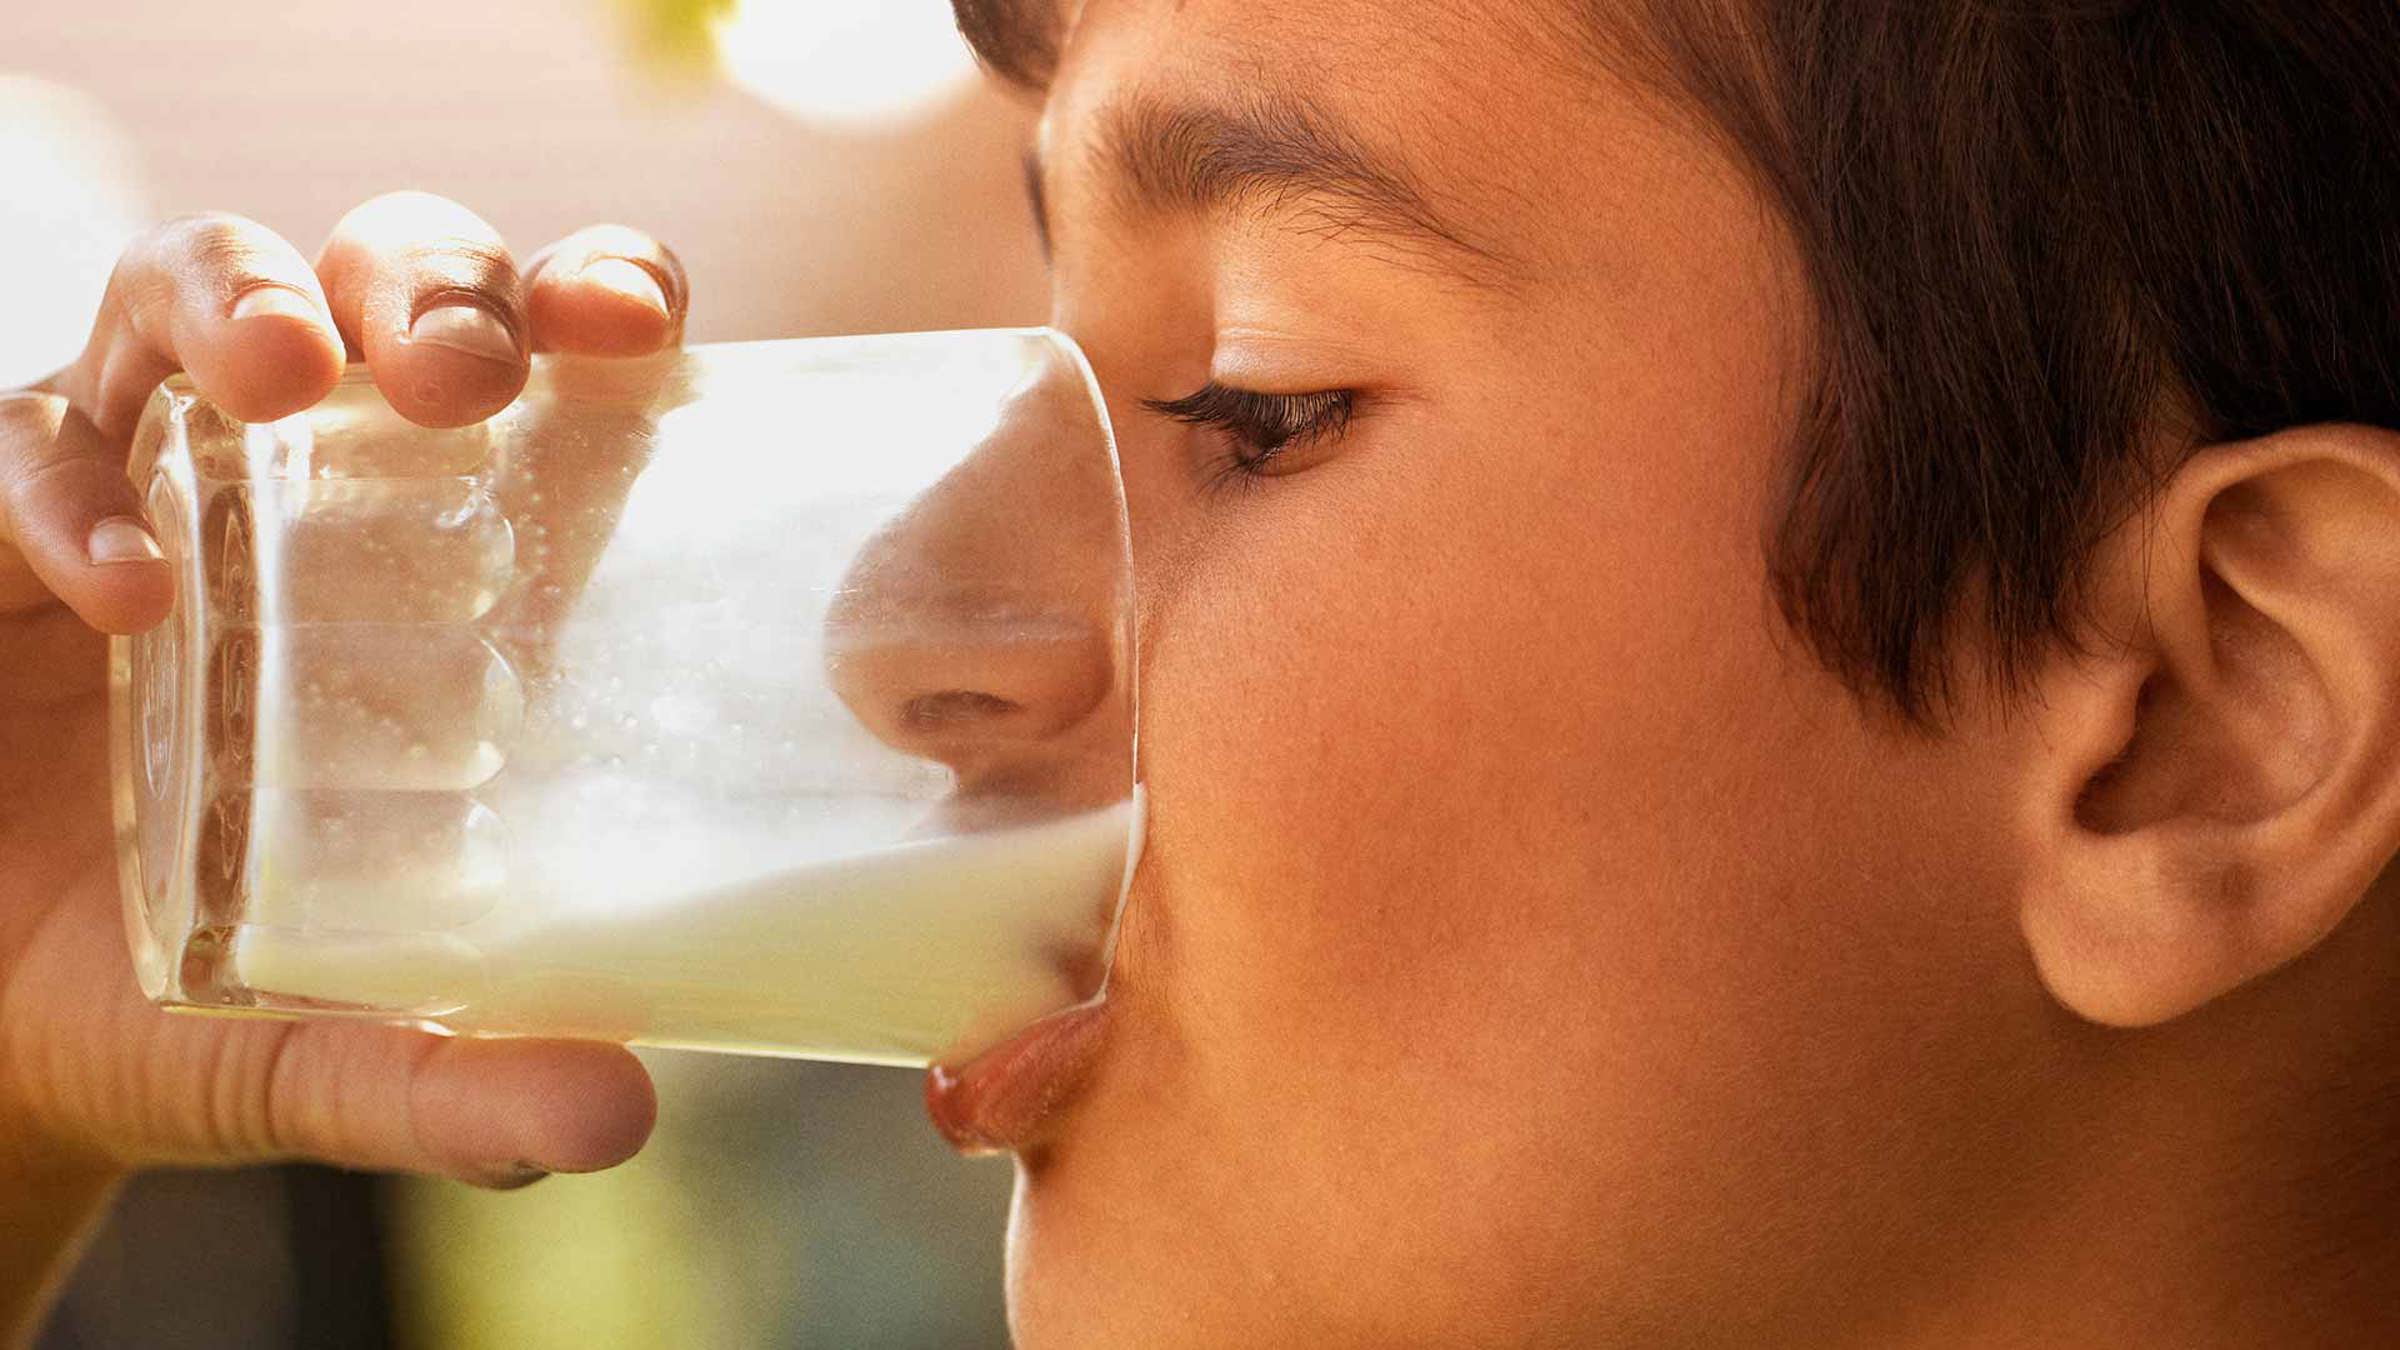 A child drinking a glass of milk